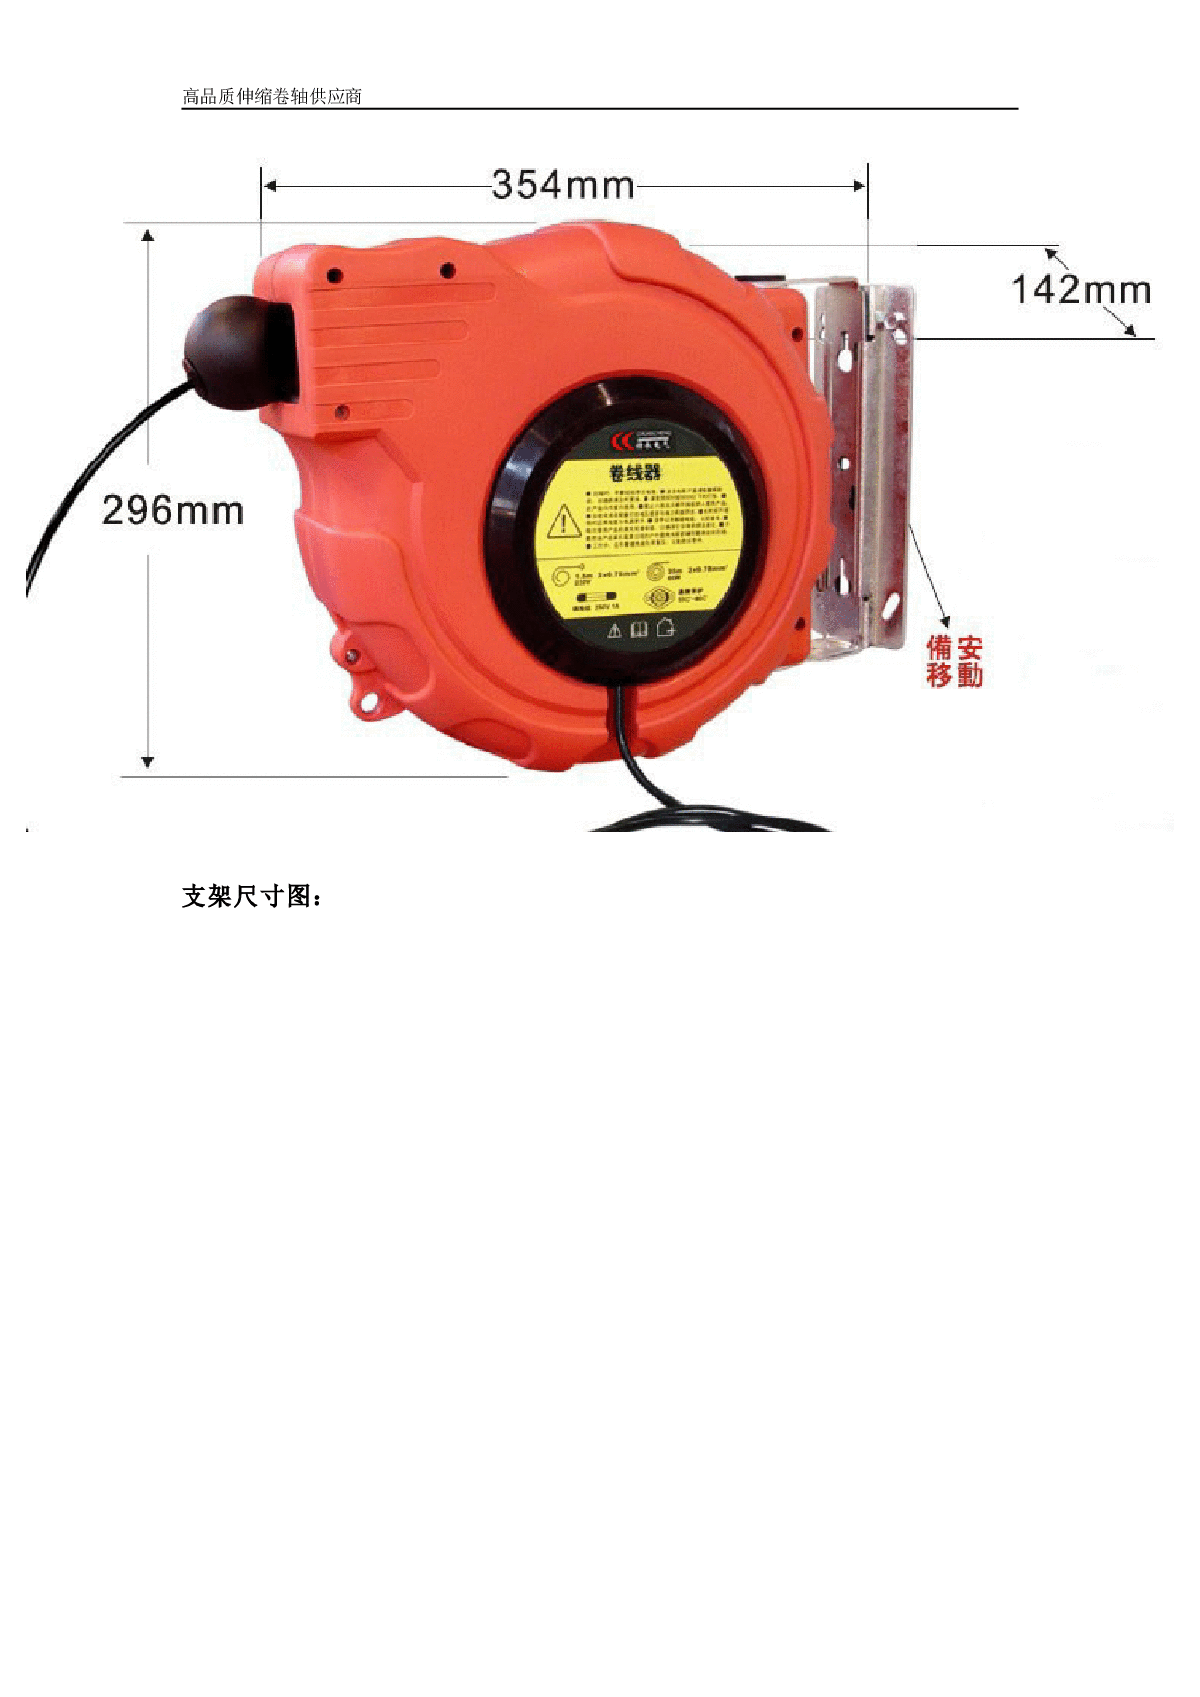  Working principle of automatic expansion cable reel - Figure 2